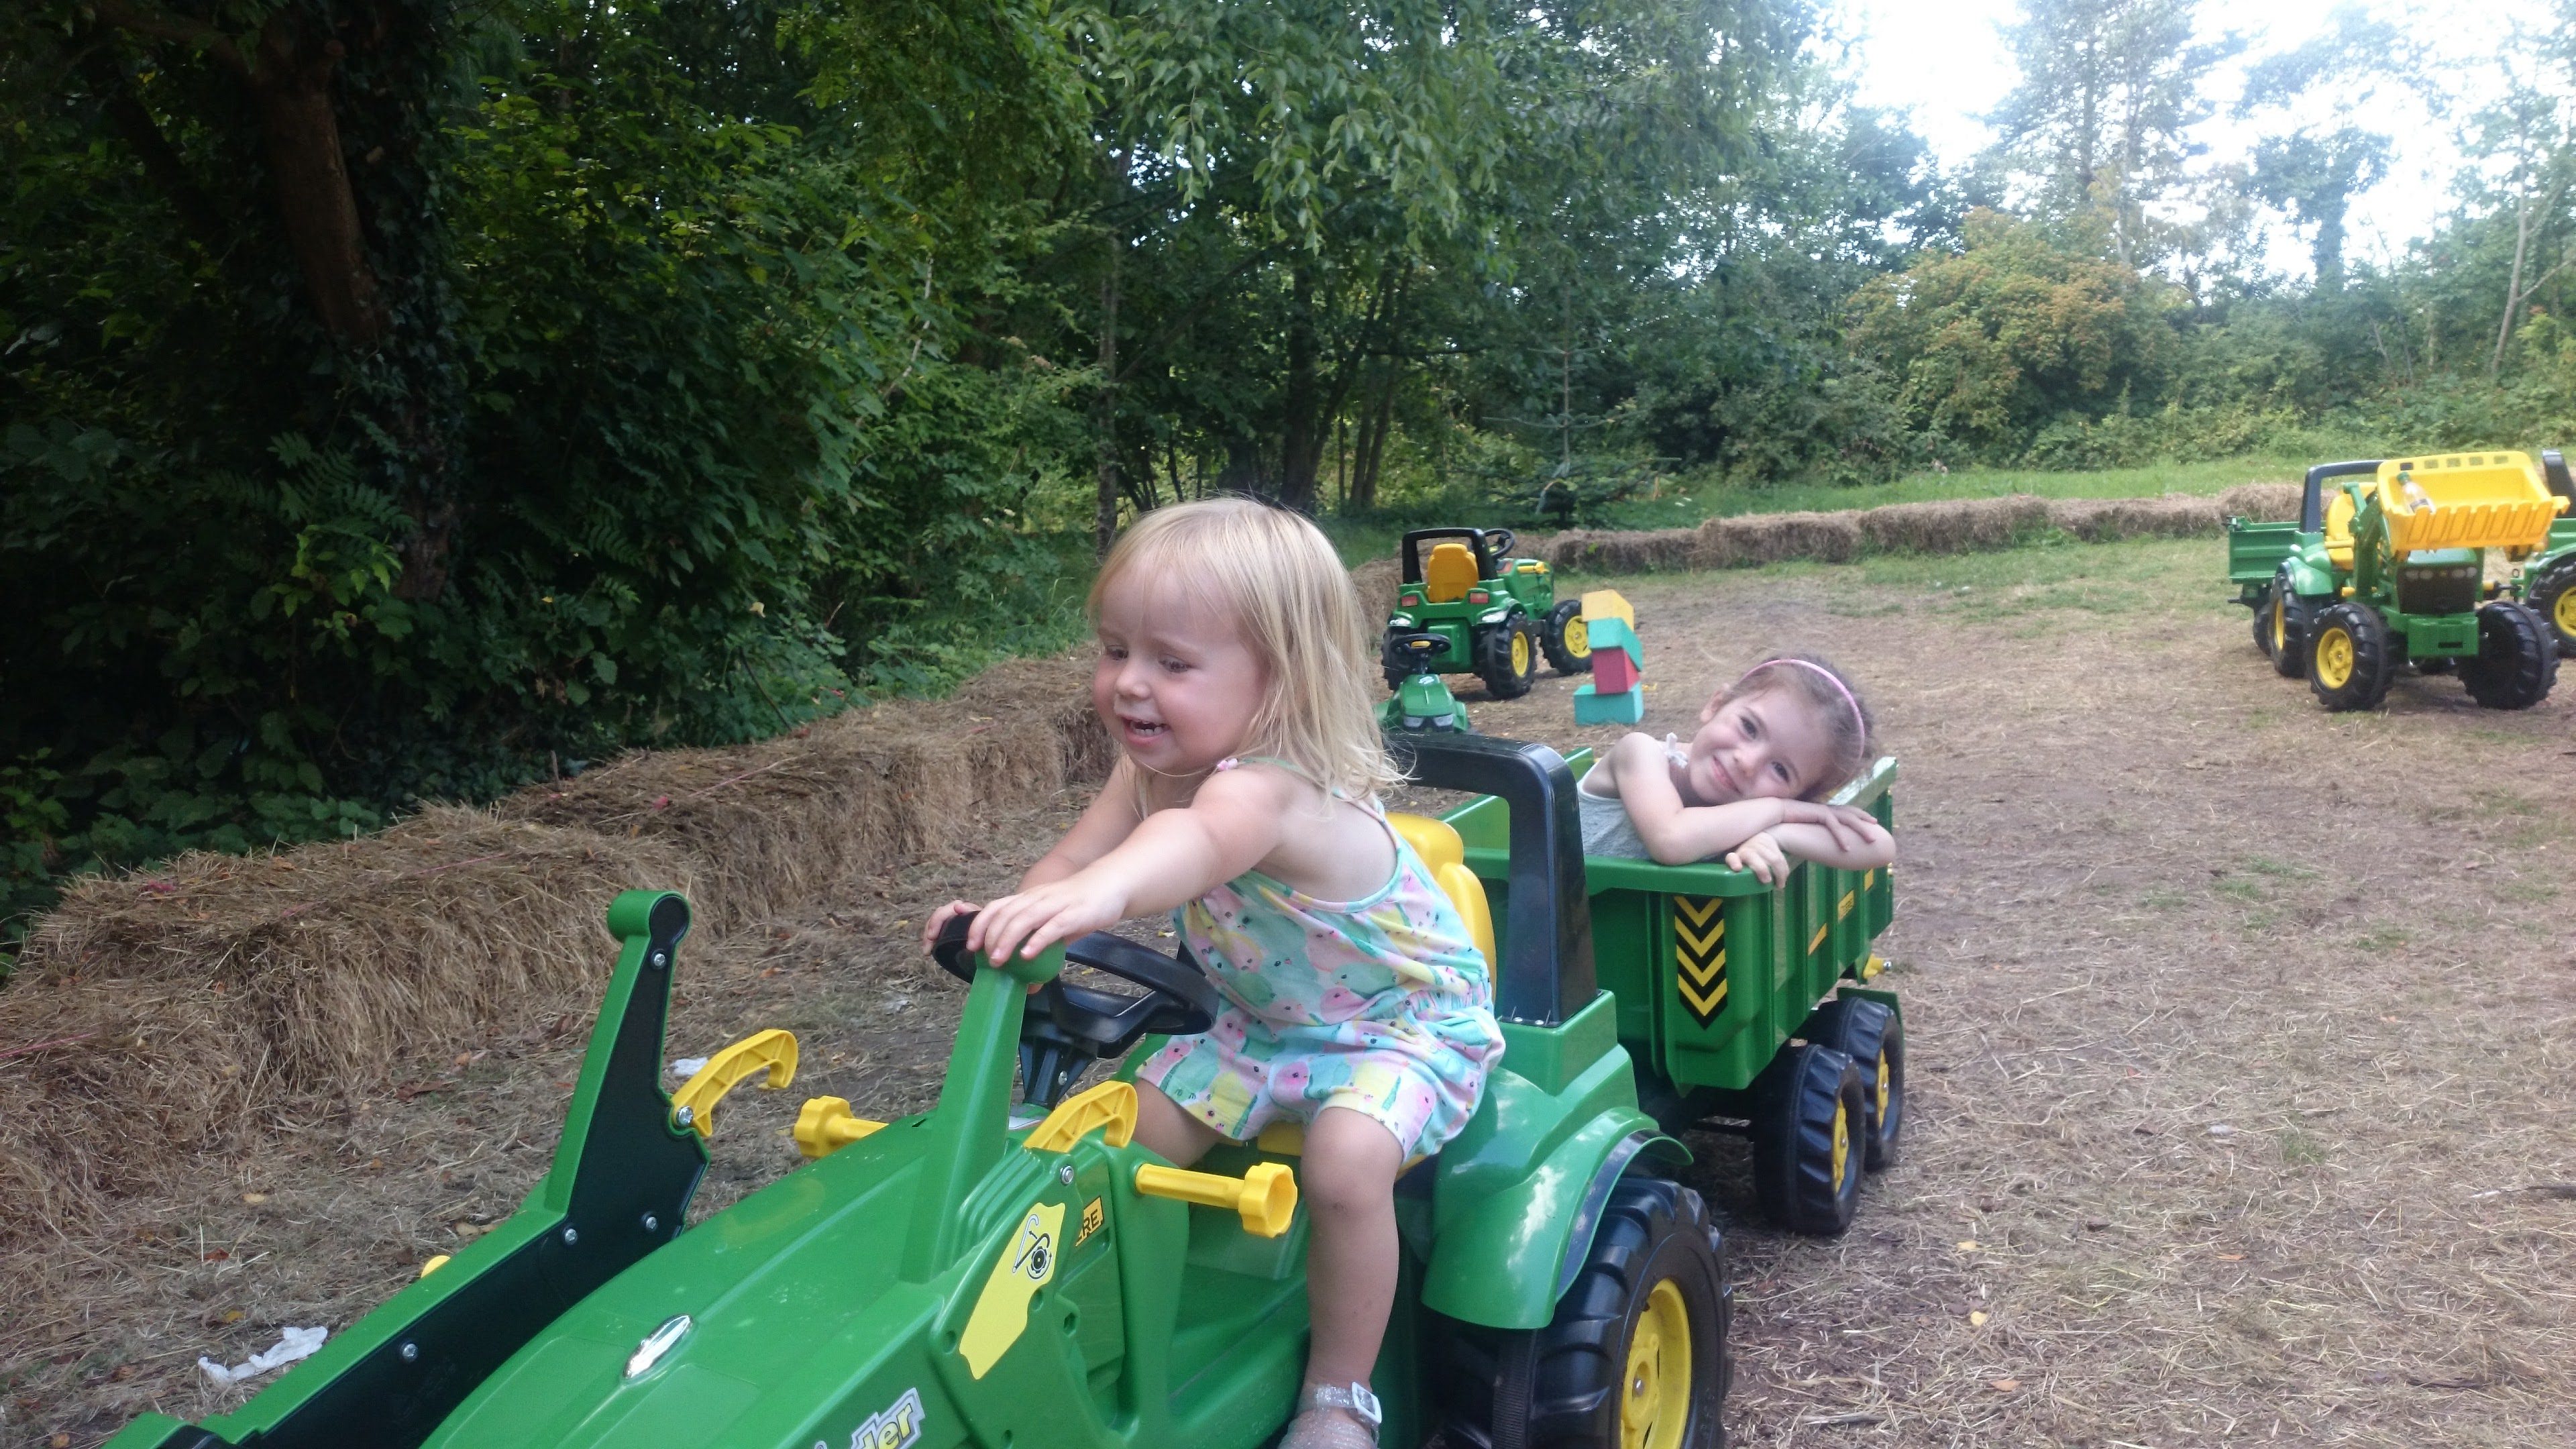 Meme and Harri on a toy tractor